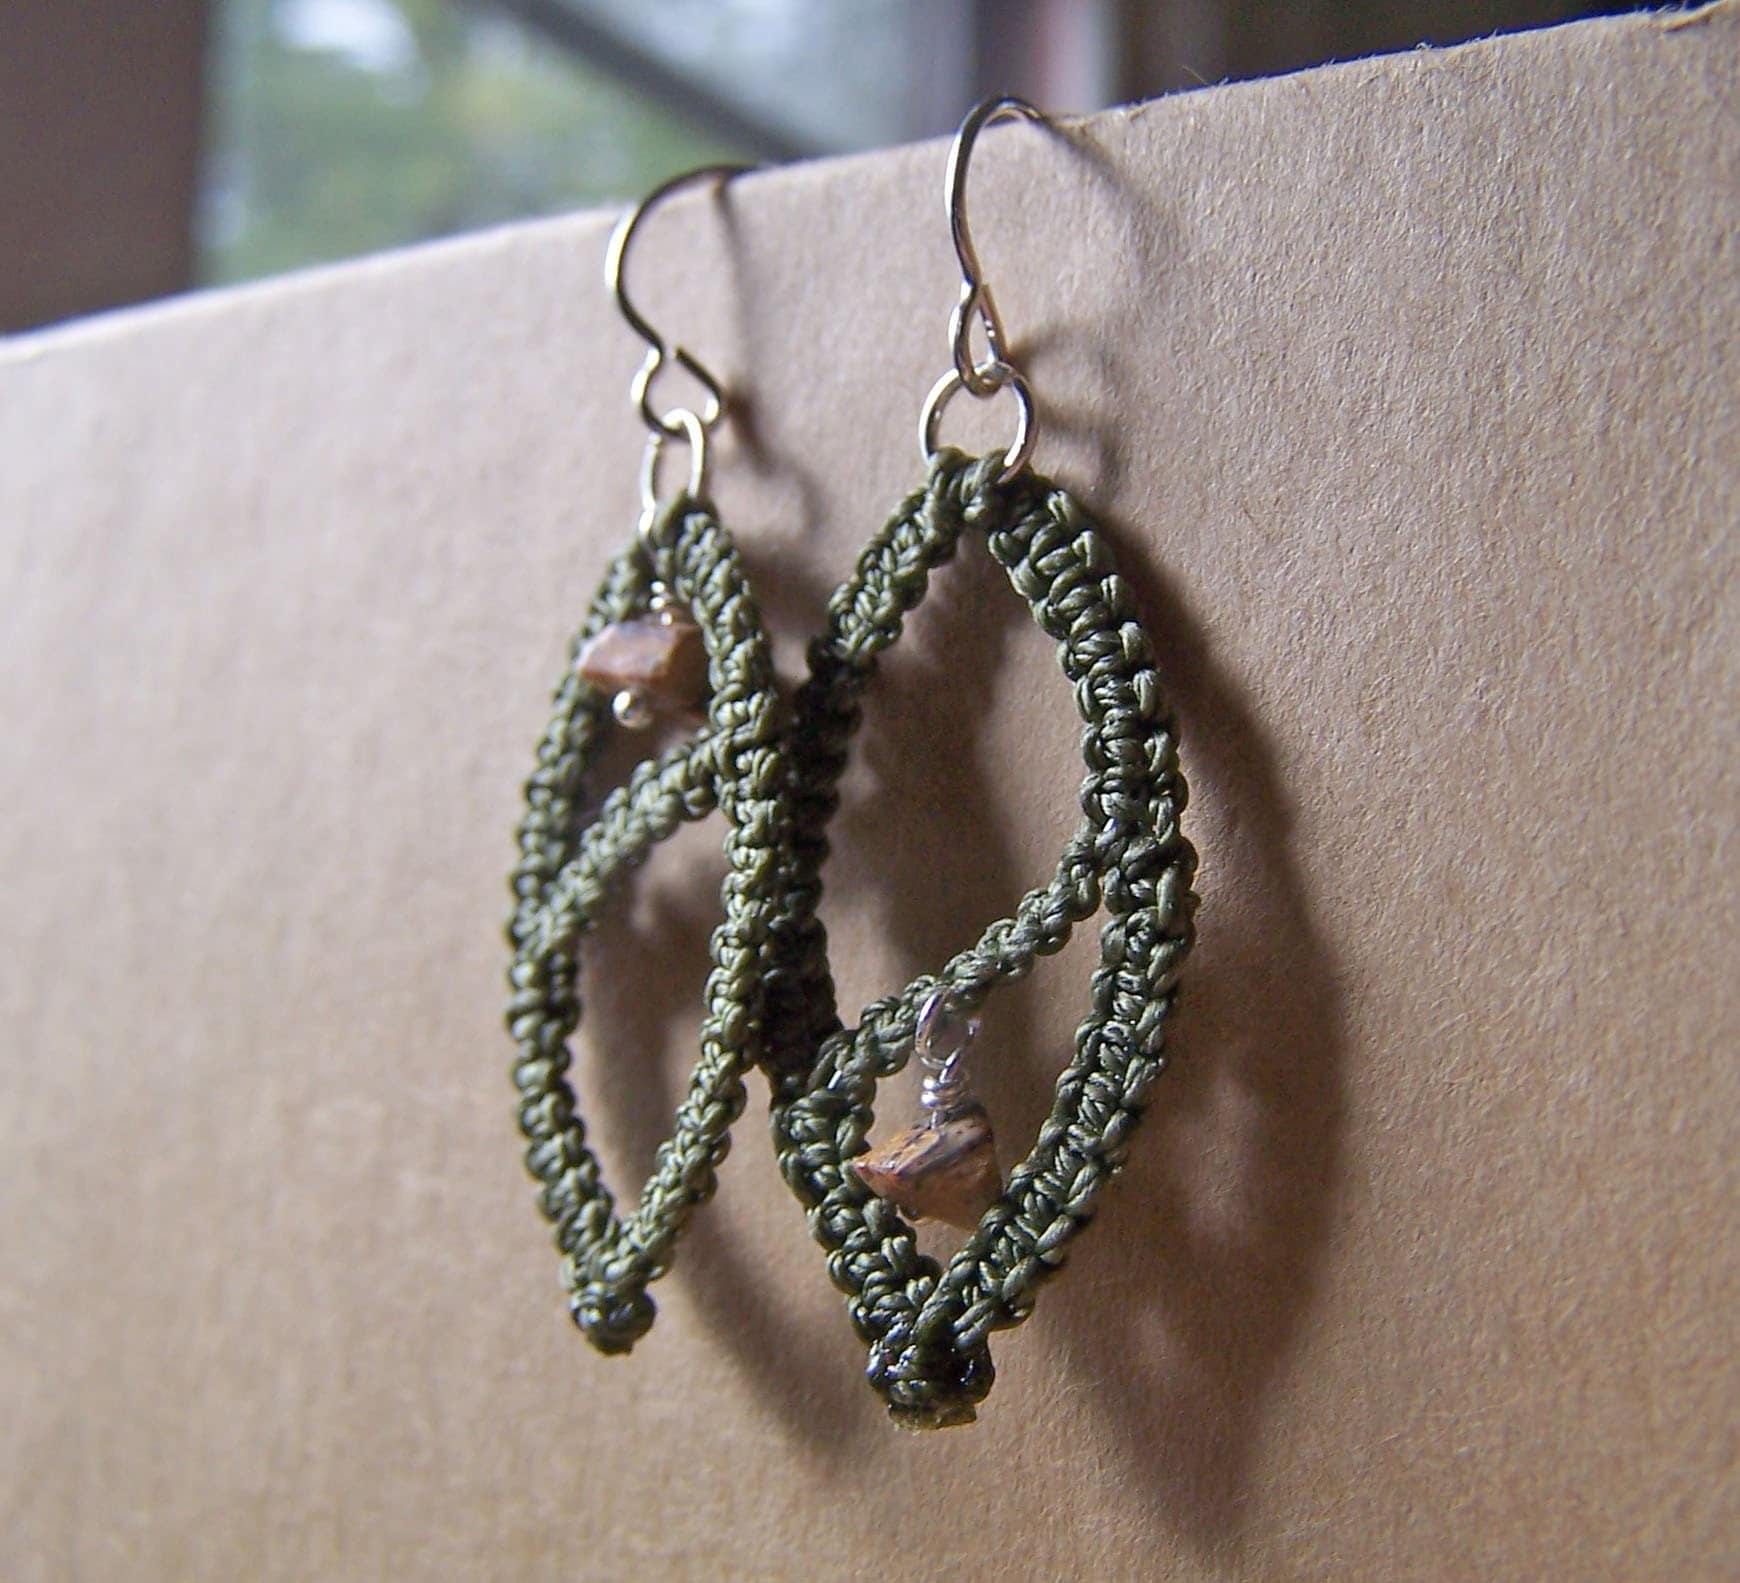 Curvature Demi Earrings in Olive